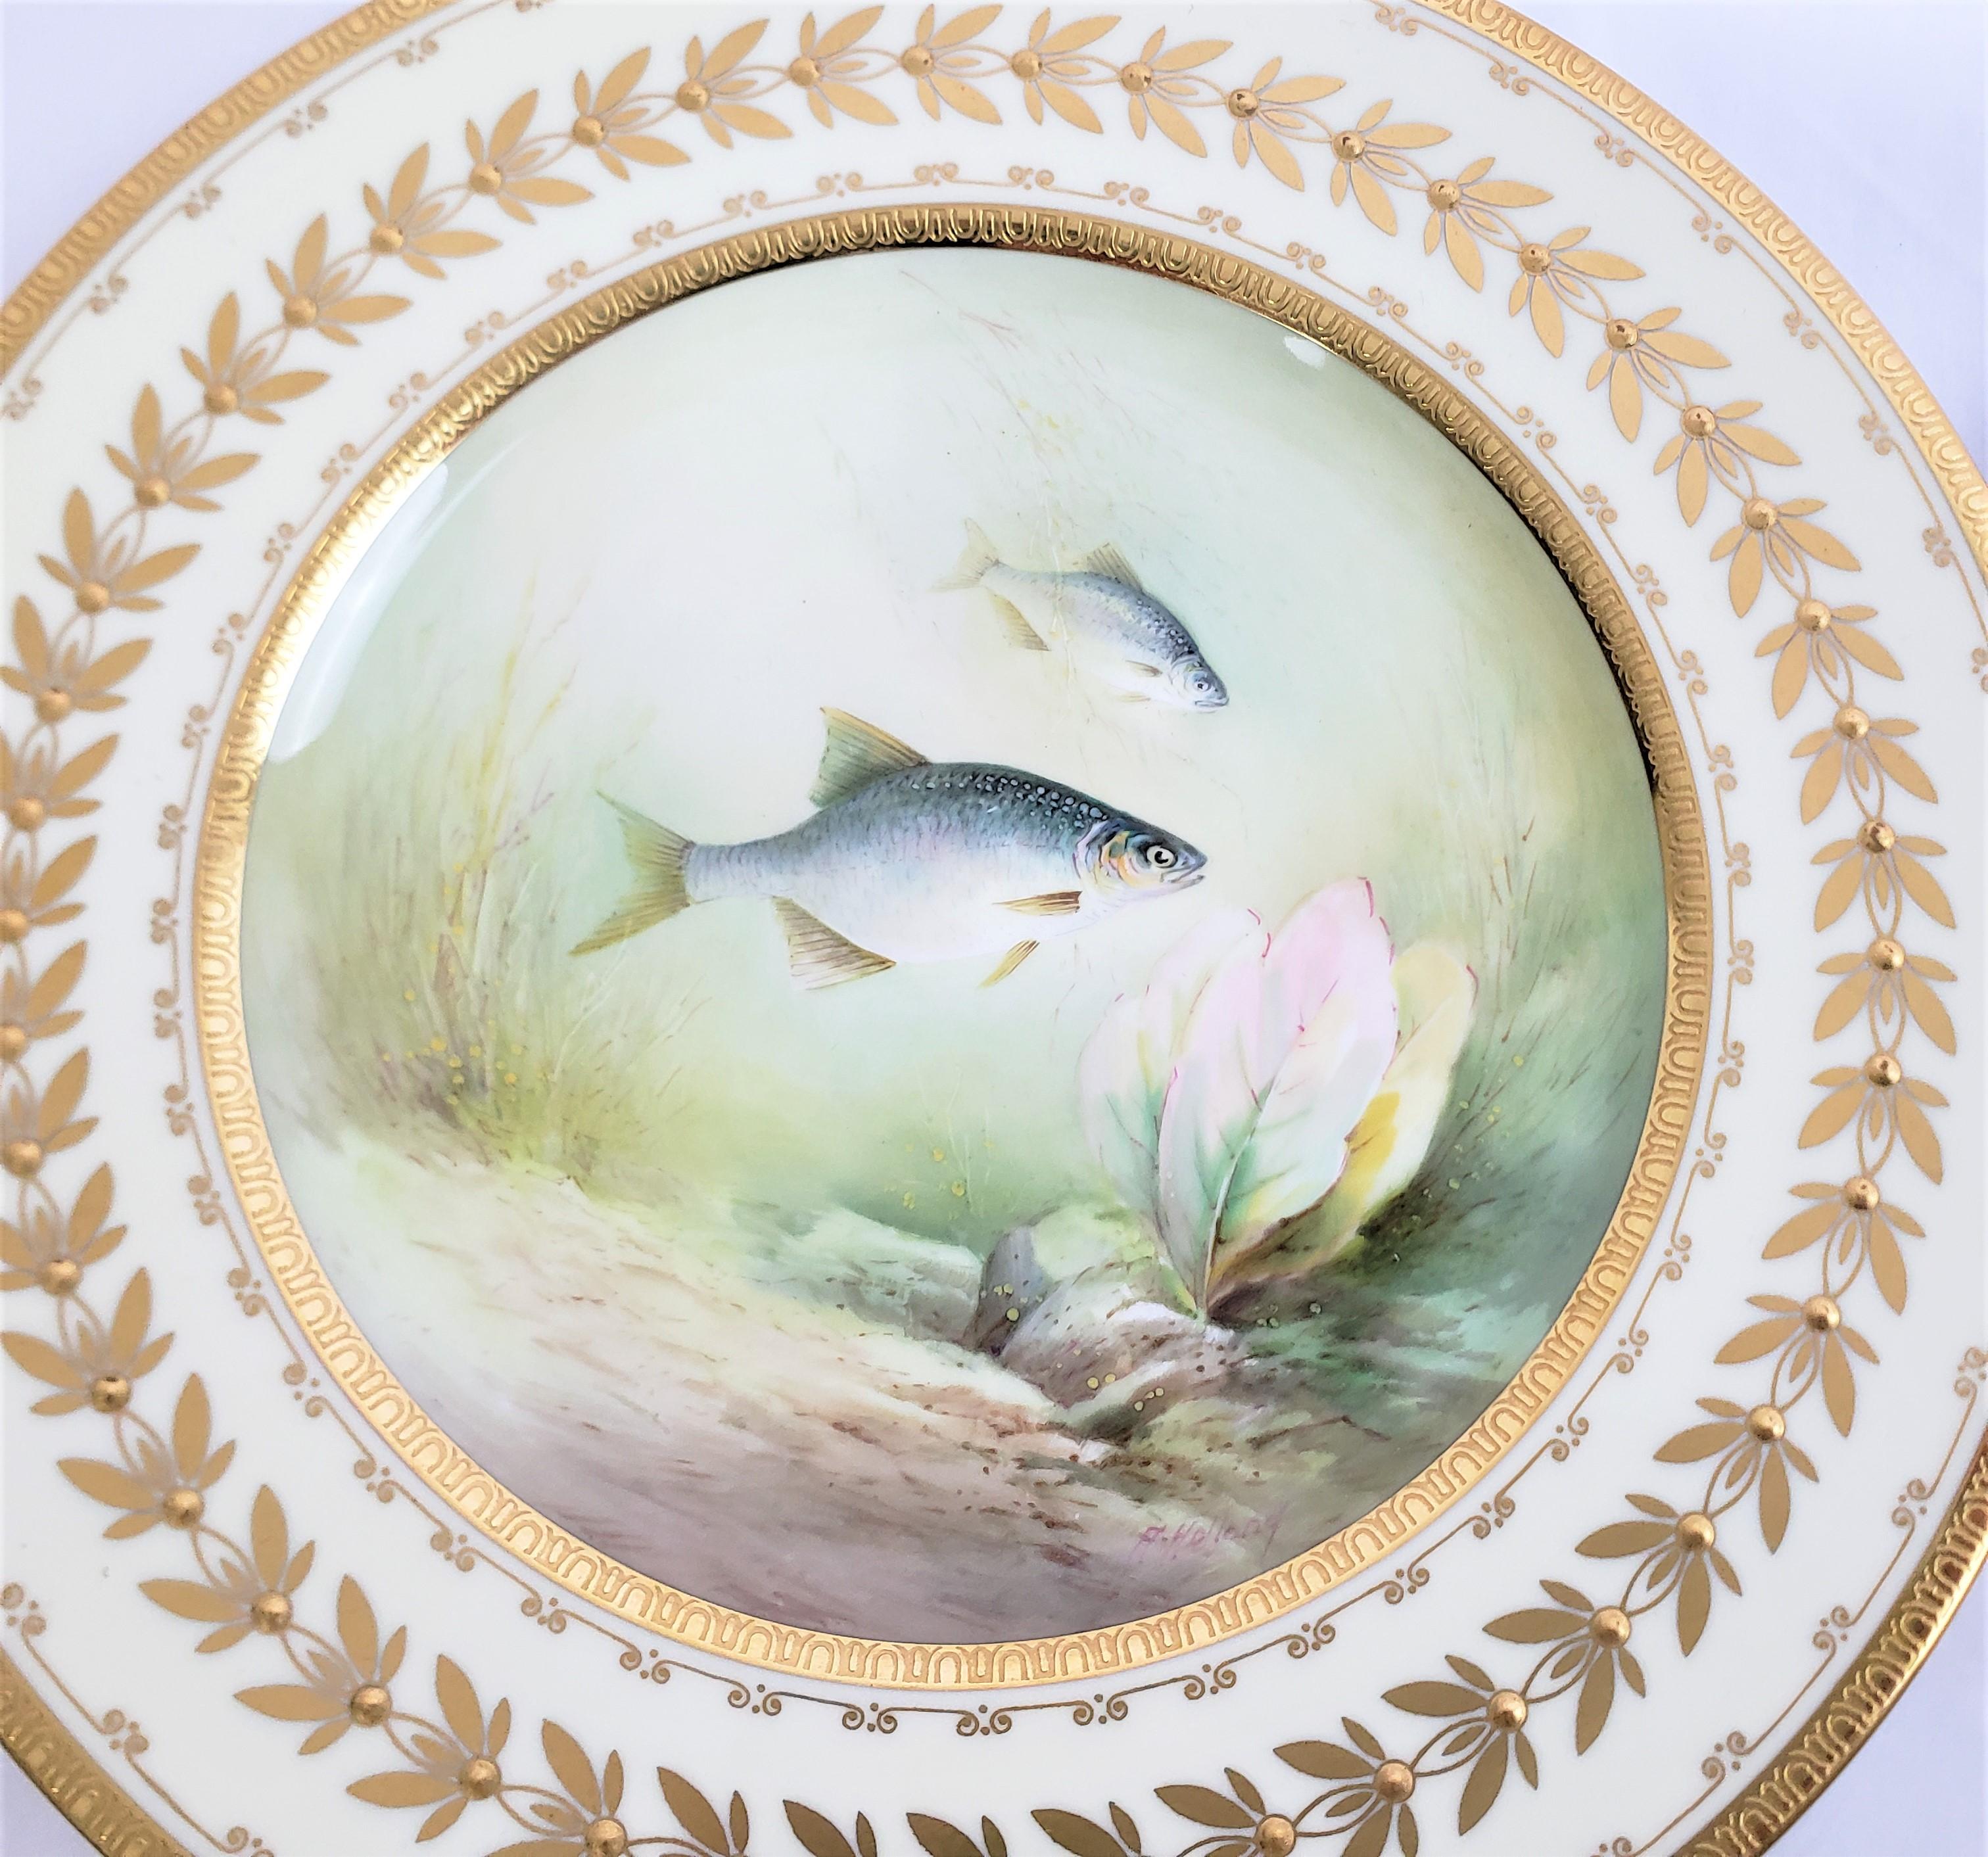 Porcelain 12 Antique Minton Hand-Painted Cabinet Plates Signed A. Holland Depicting Fish For Sale